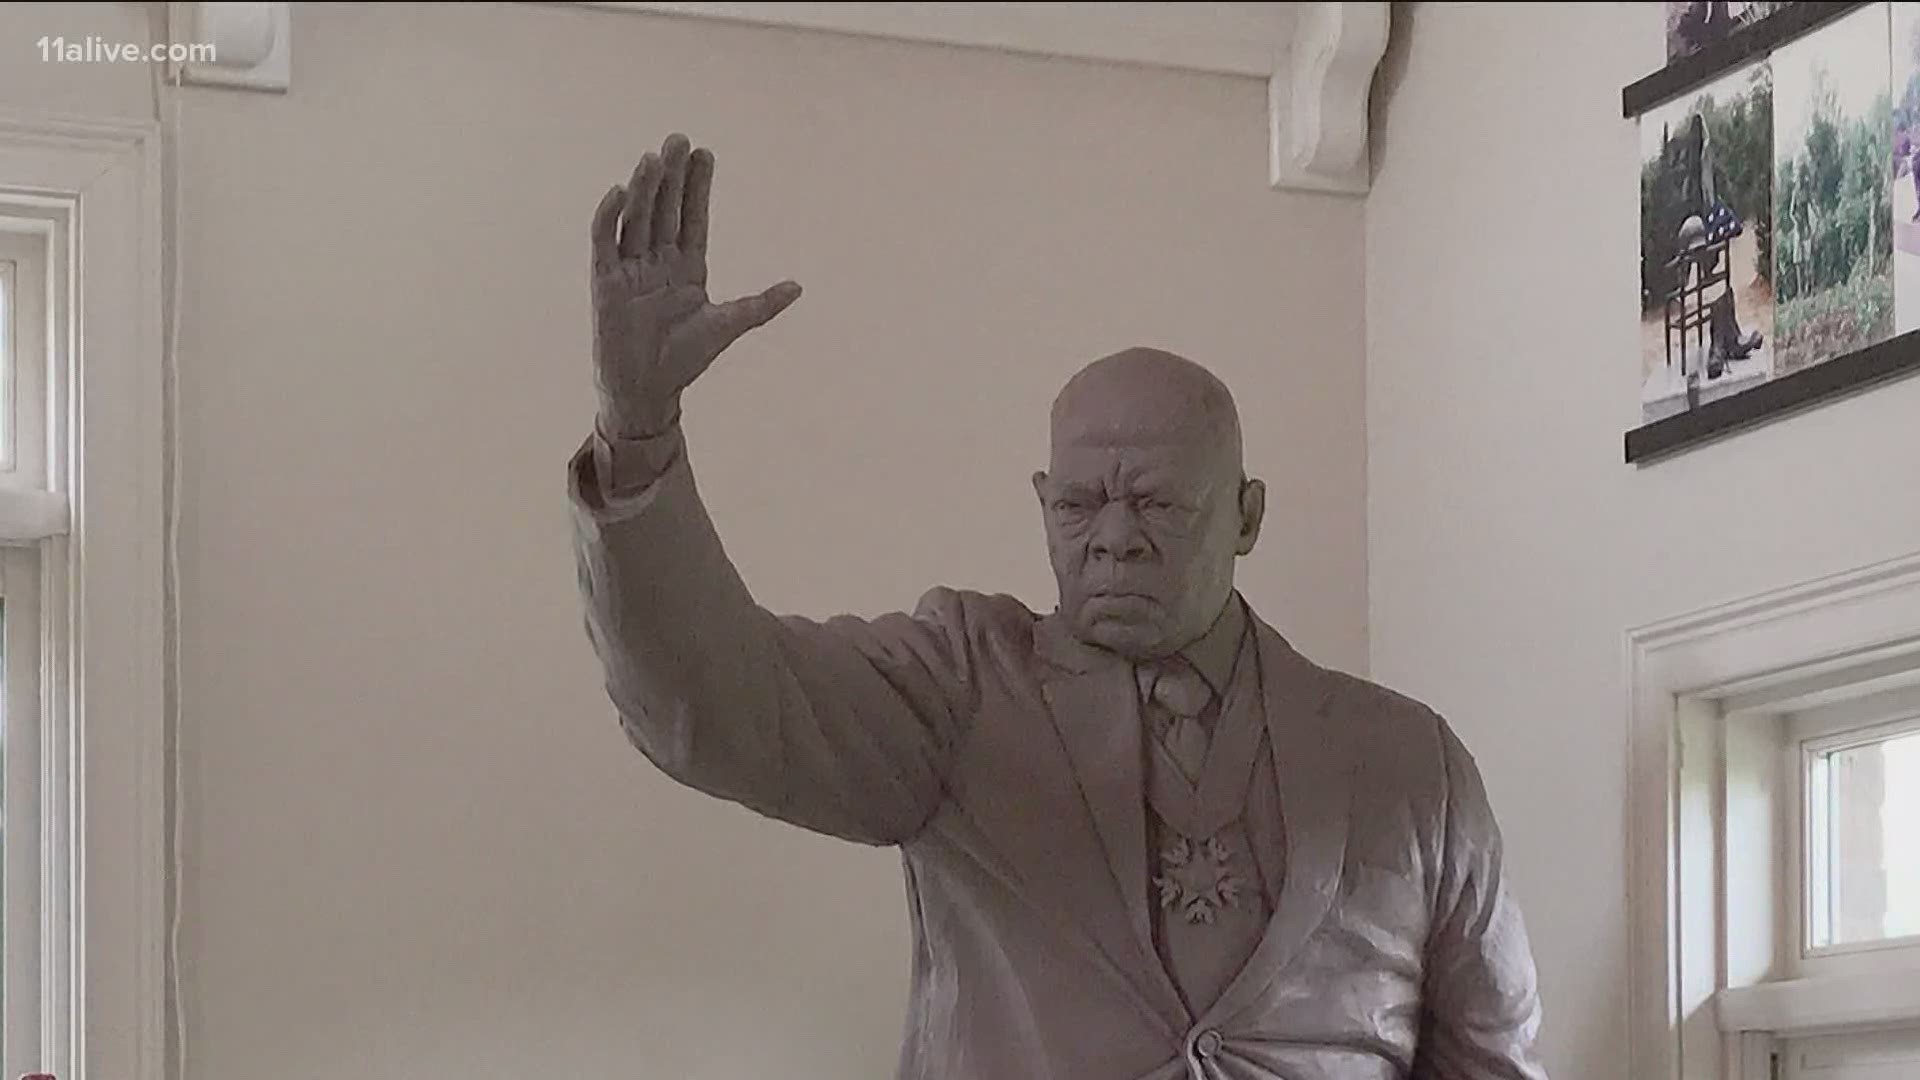 The artist behind the statue shares his conversation with the civil rights leader.